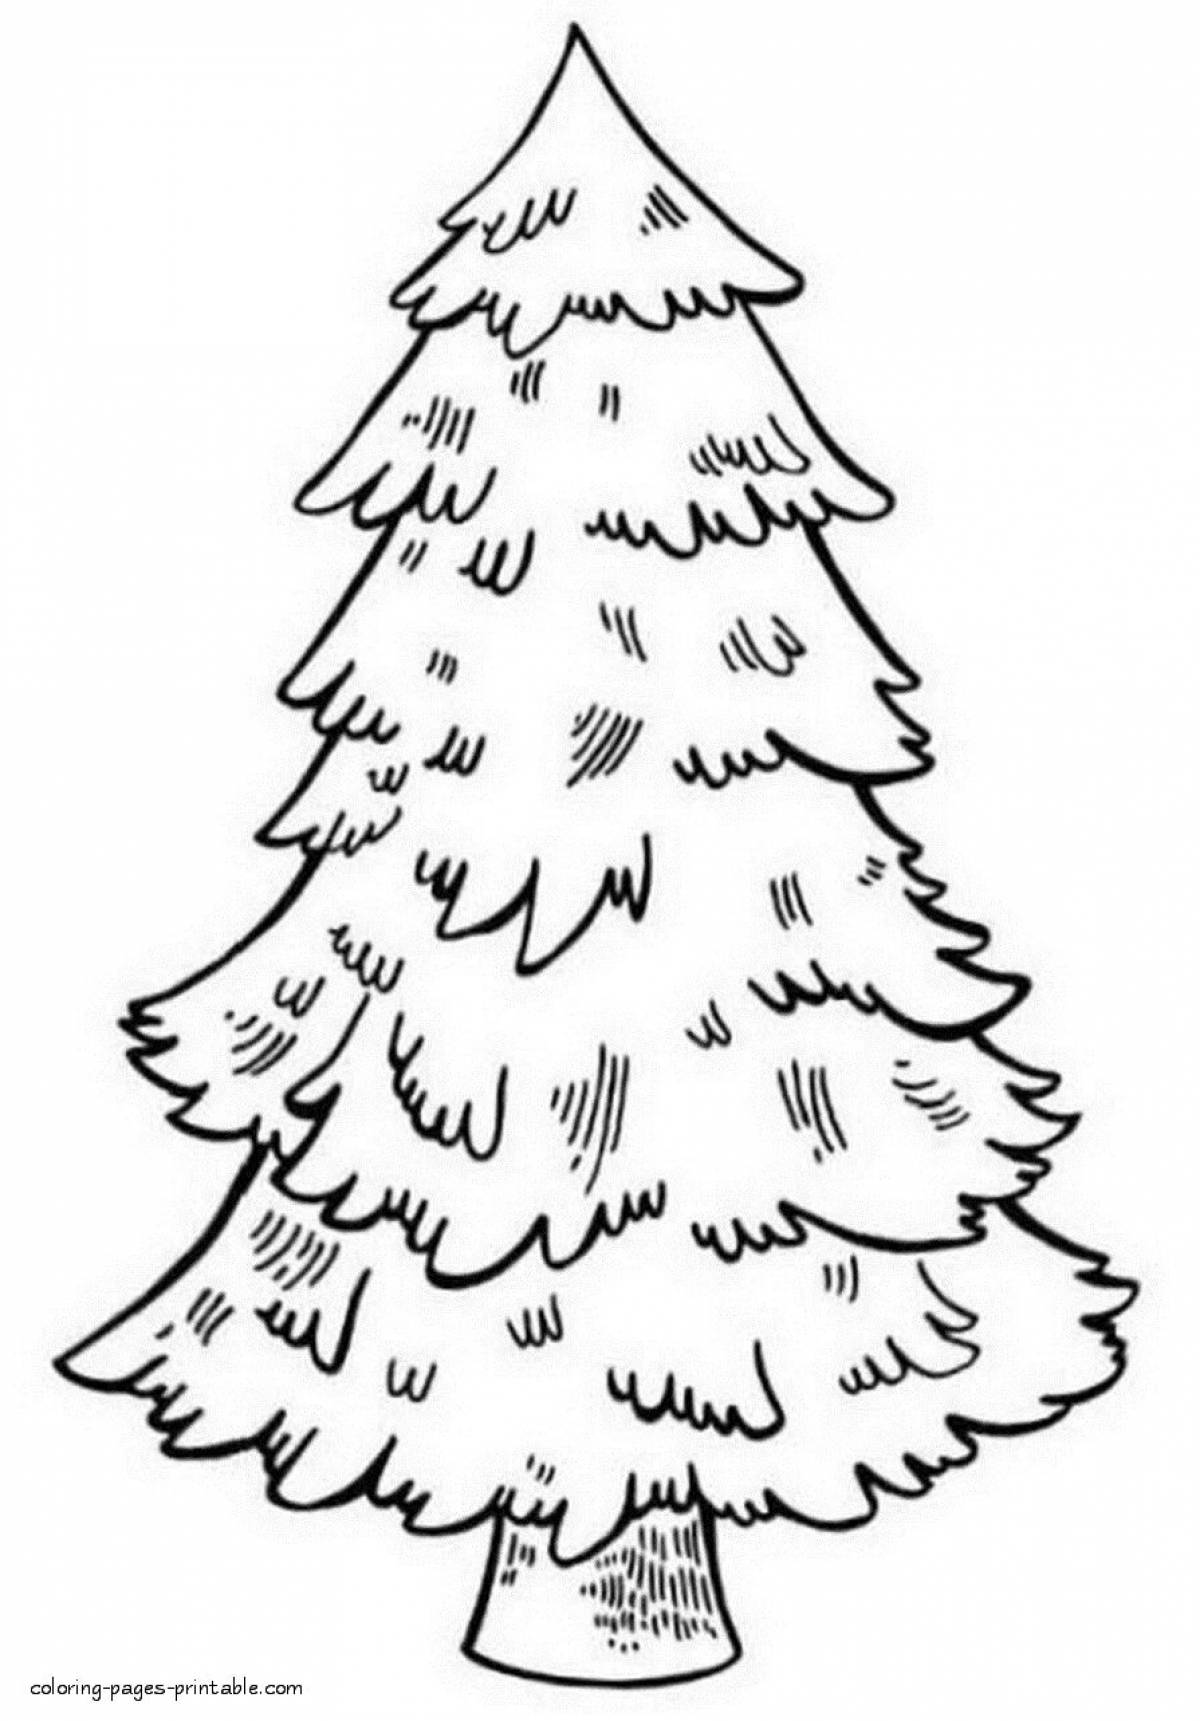 Refreshing winter tree coloring page